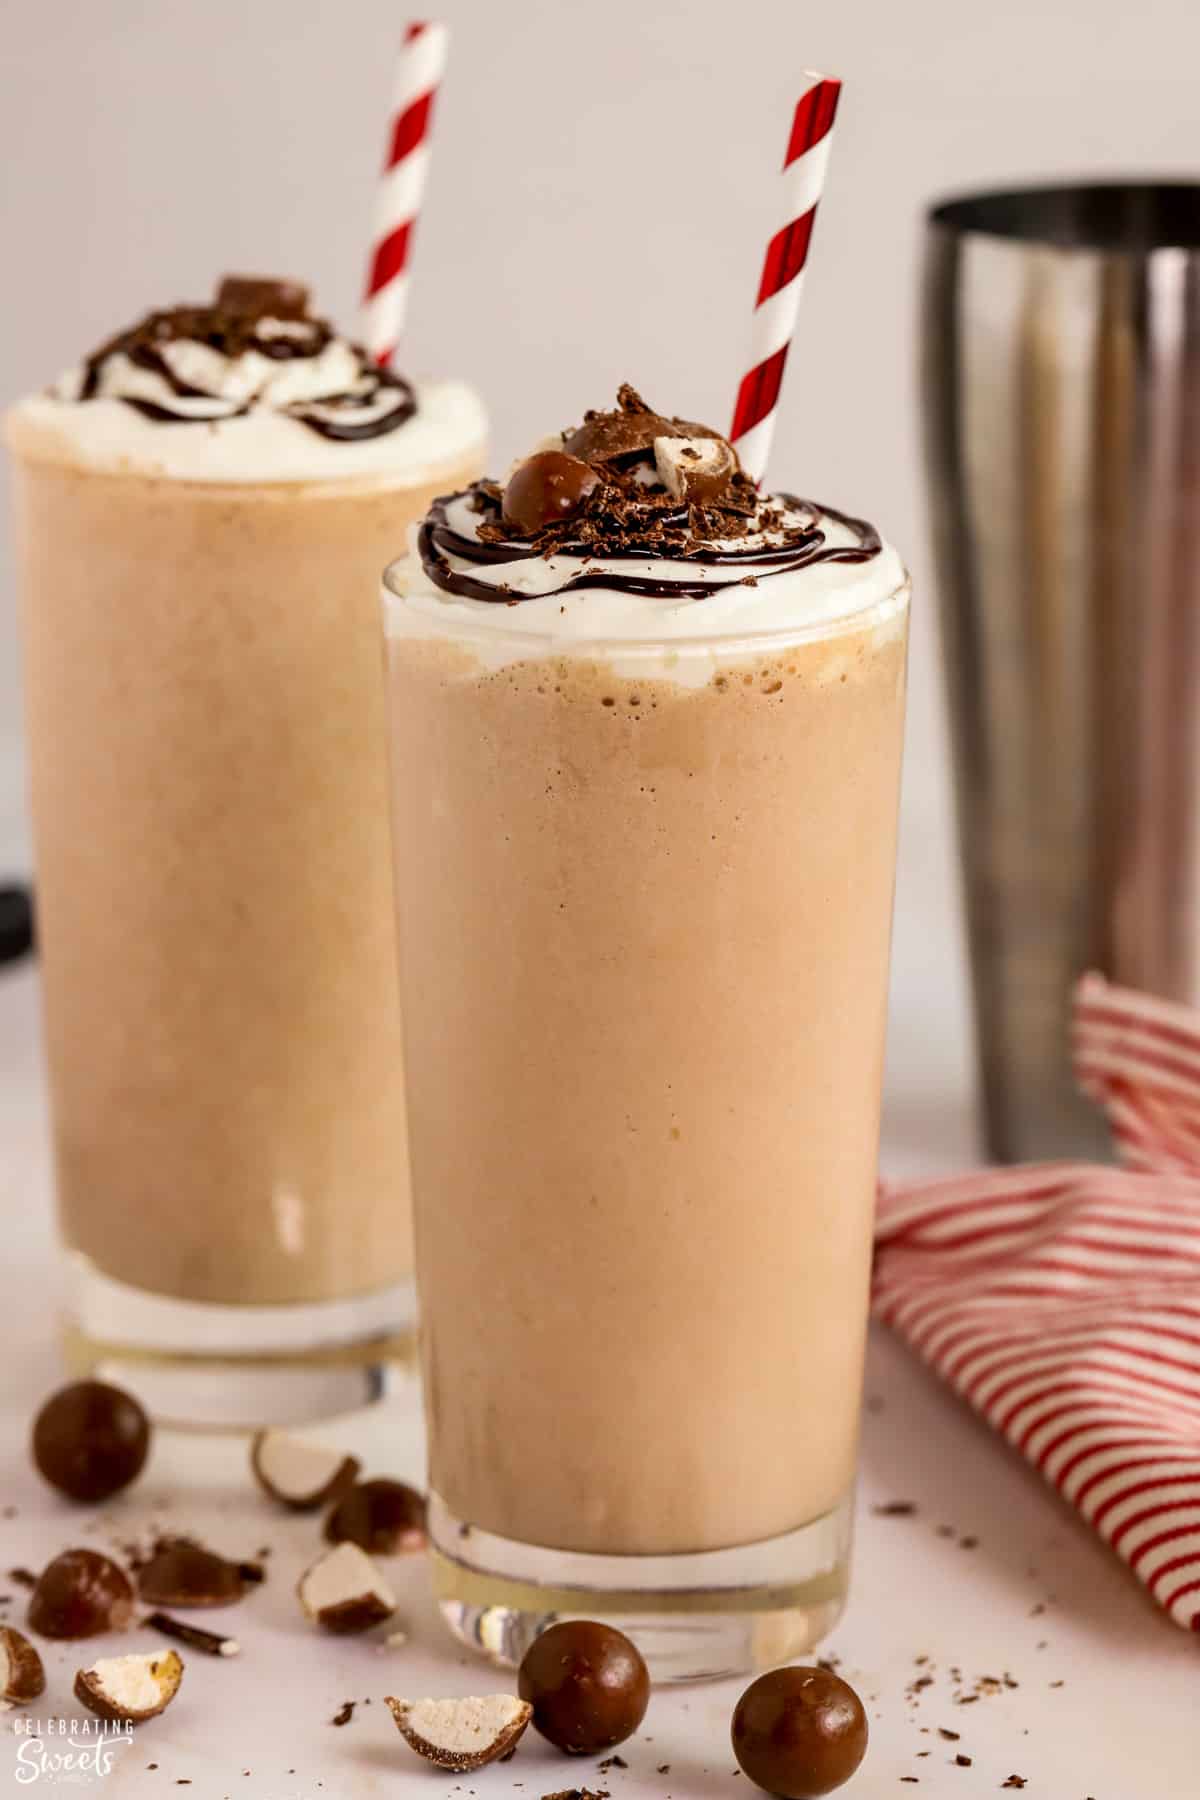 Two glasses filled with chocolate malt topped with whipped cream, chocolate sauce, and chopped malted milk balls.